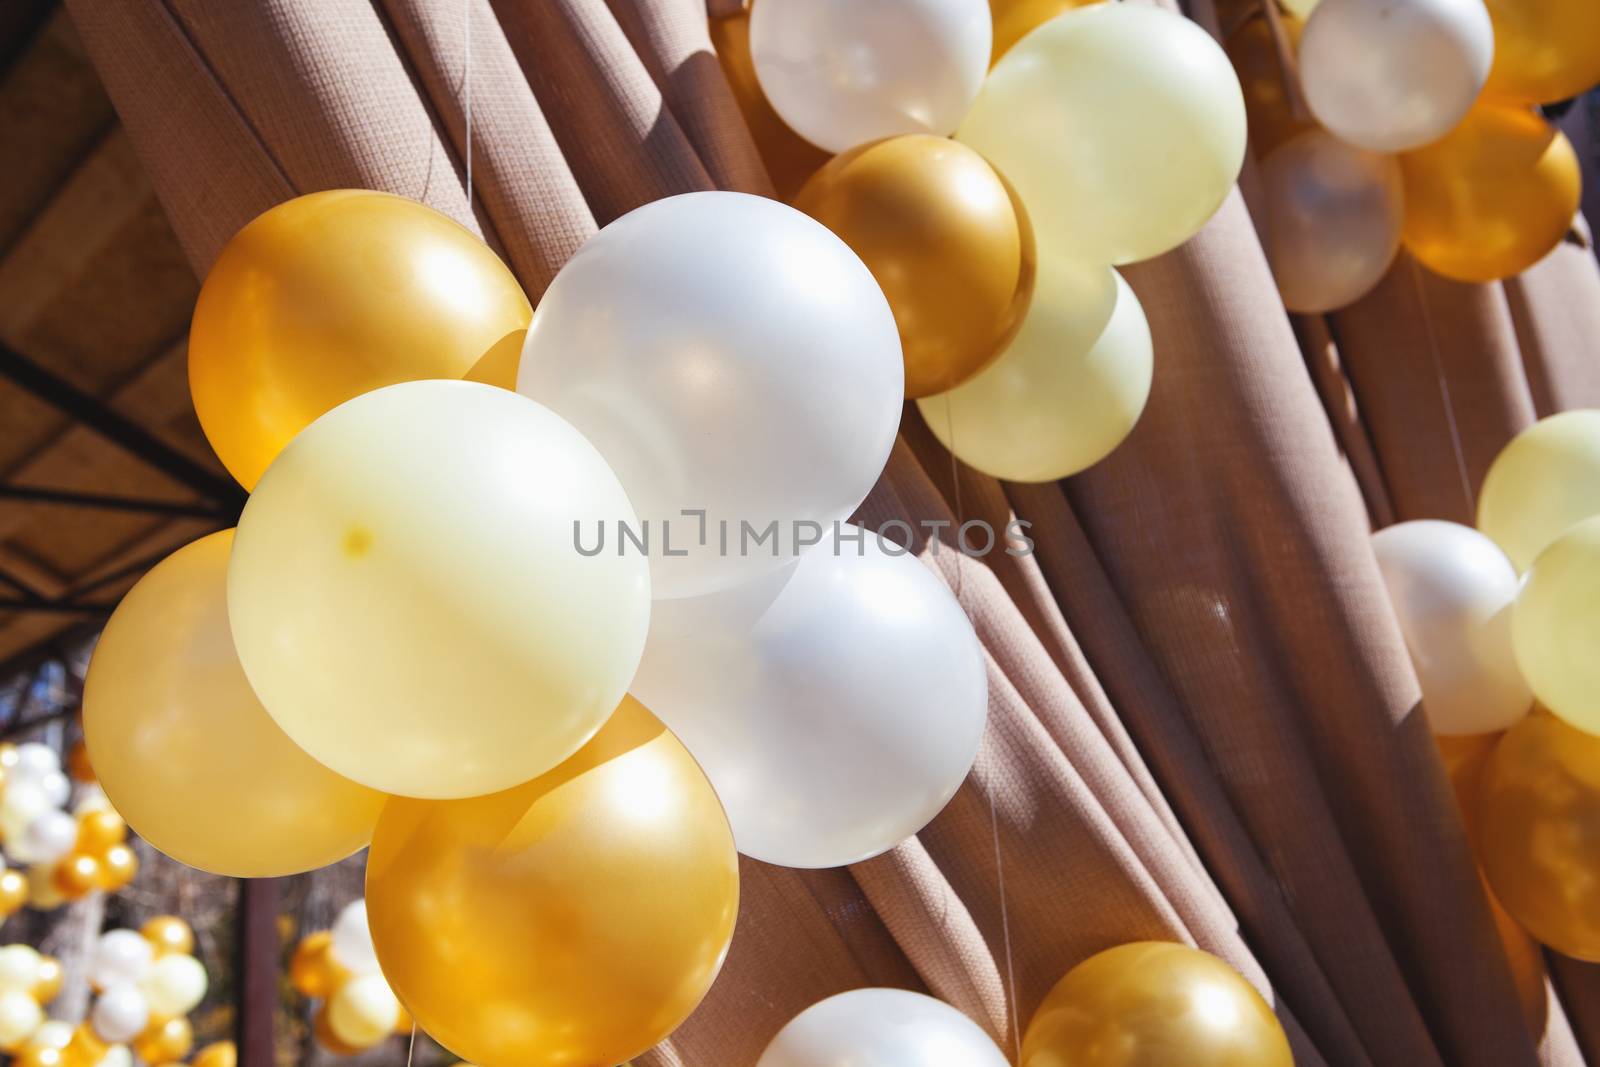 decoration with balloons by vsurkov